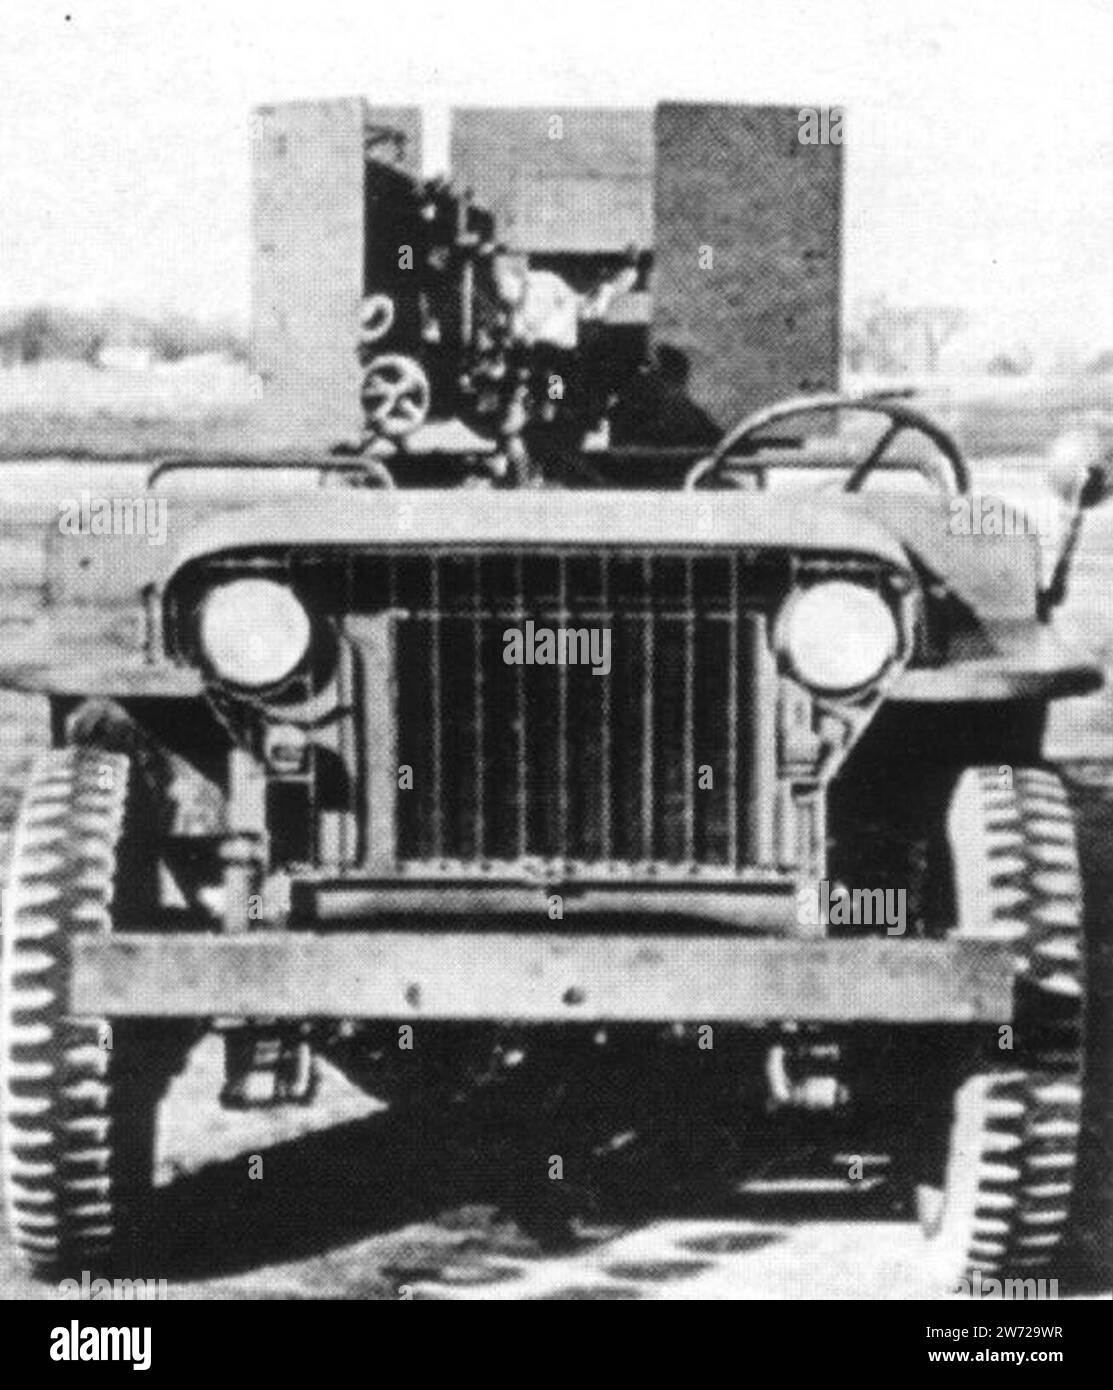 Willys 6x6 'Super-Jeep' 37mm T14 Gun Motor Carriage n ° 1, avant. Banque D'Images